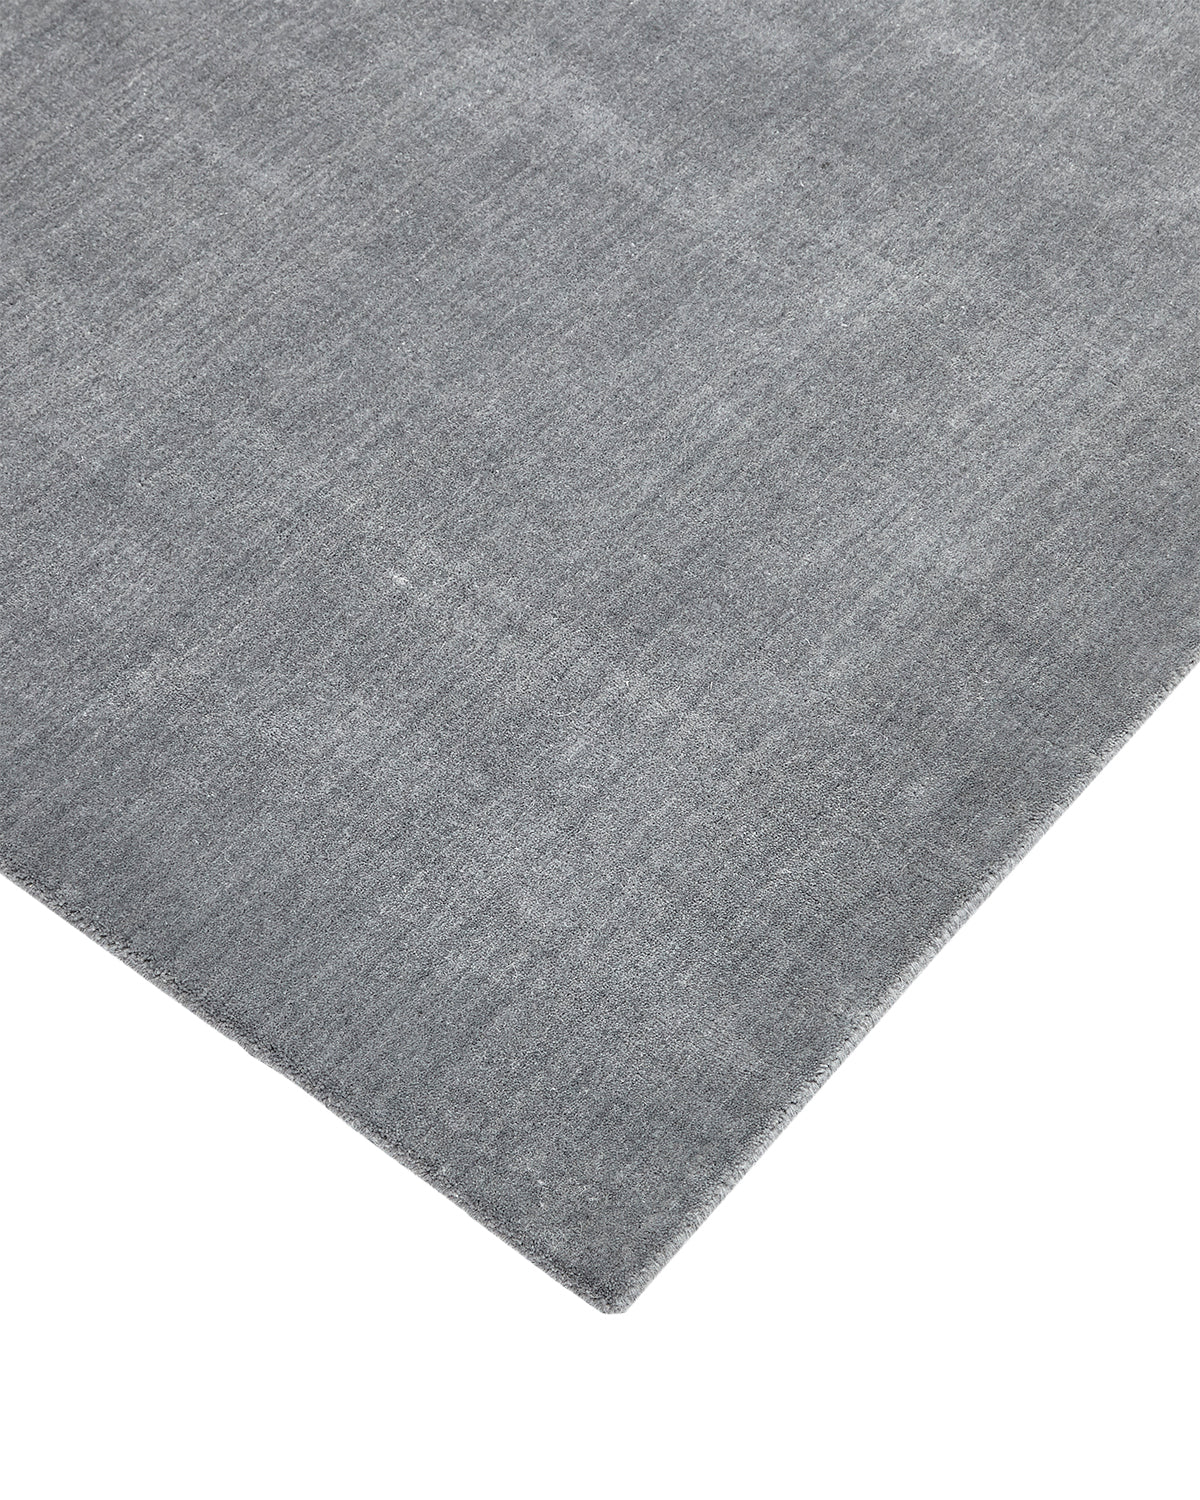 Wellington Hand Loomed Contemporary Solid Area Rug